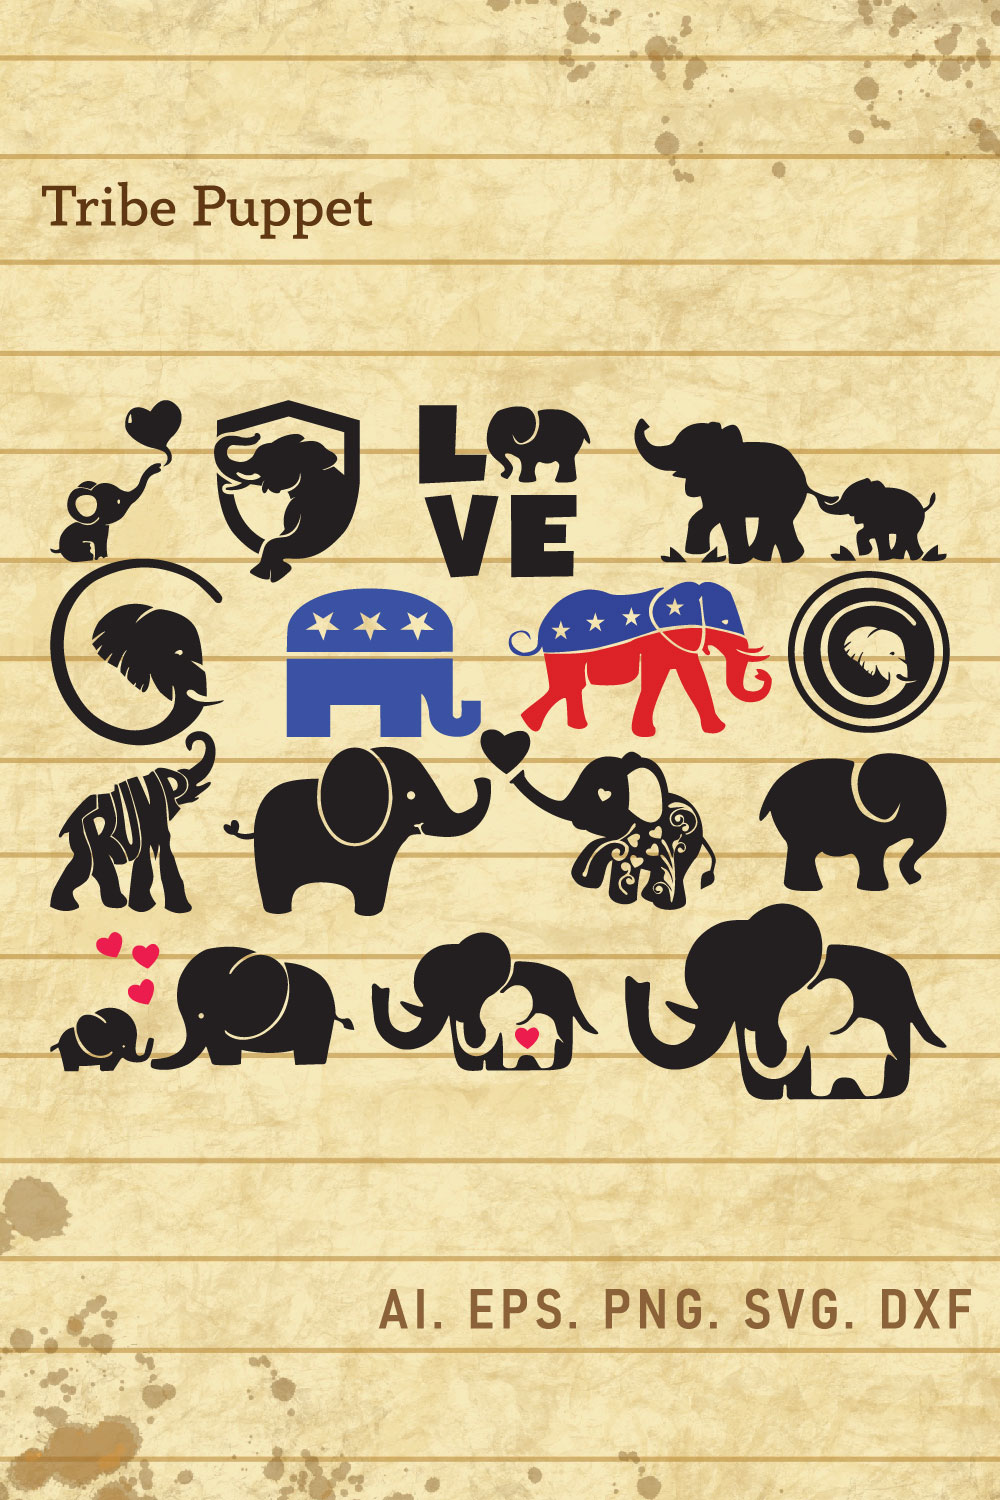 Bunch of elephants that are on a piece of paper.